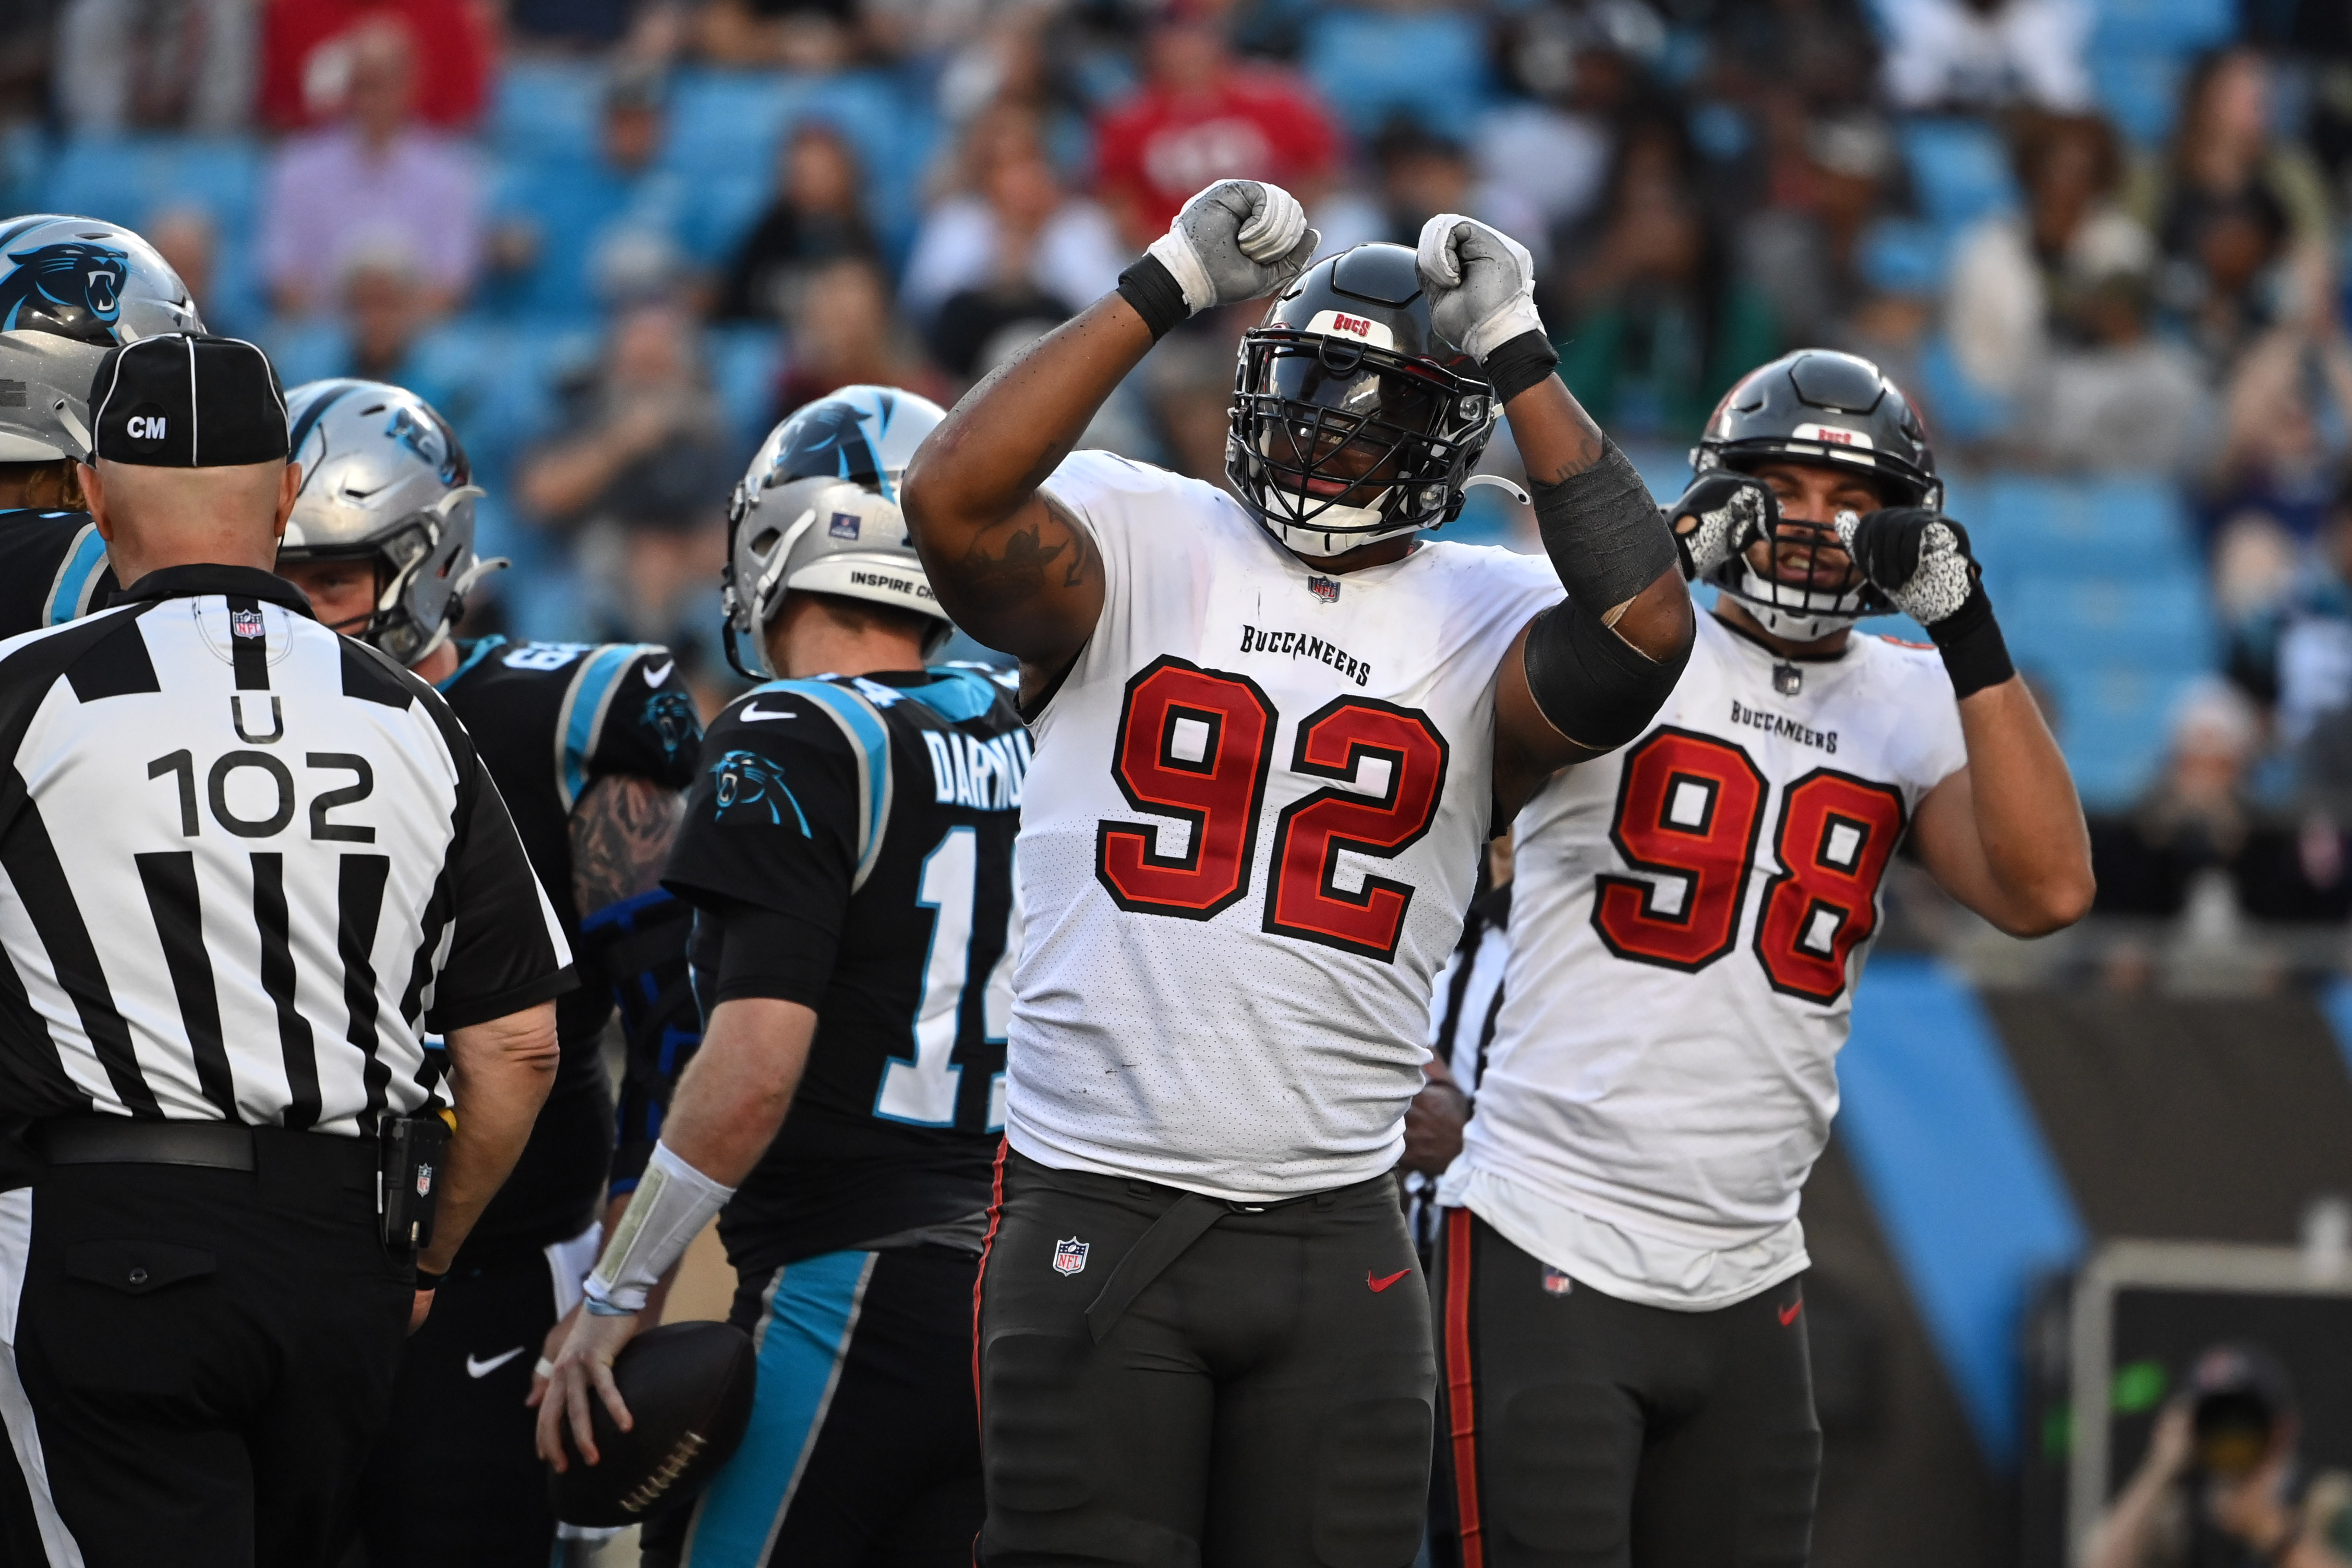 Tampa Bay Buccaneers defensive end William Gholston (92) and linebacker Anthony Nelson (98) celebrate after sacking Carolina Panthers quarterback Sam Darnold (14) in the fourth quarter at Bank of America Stadium.